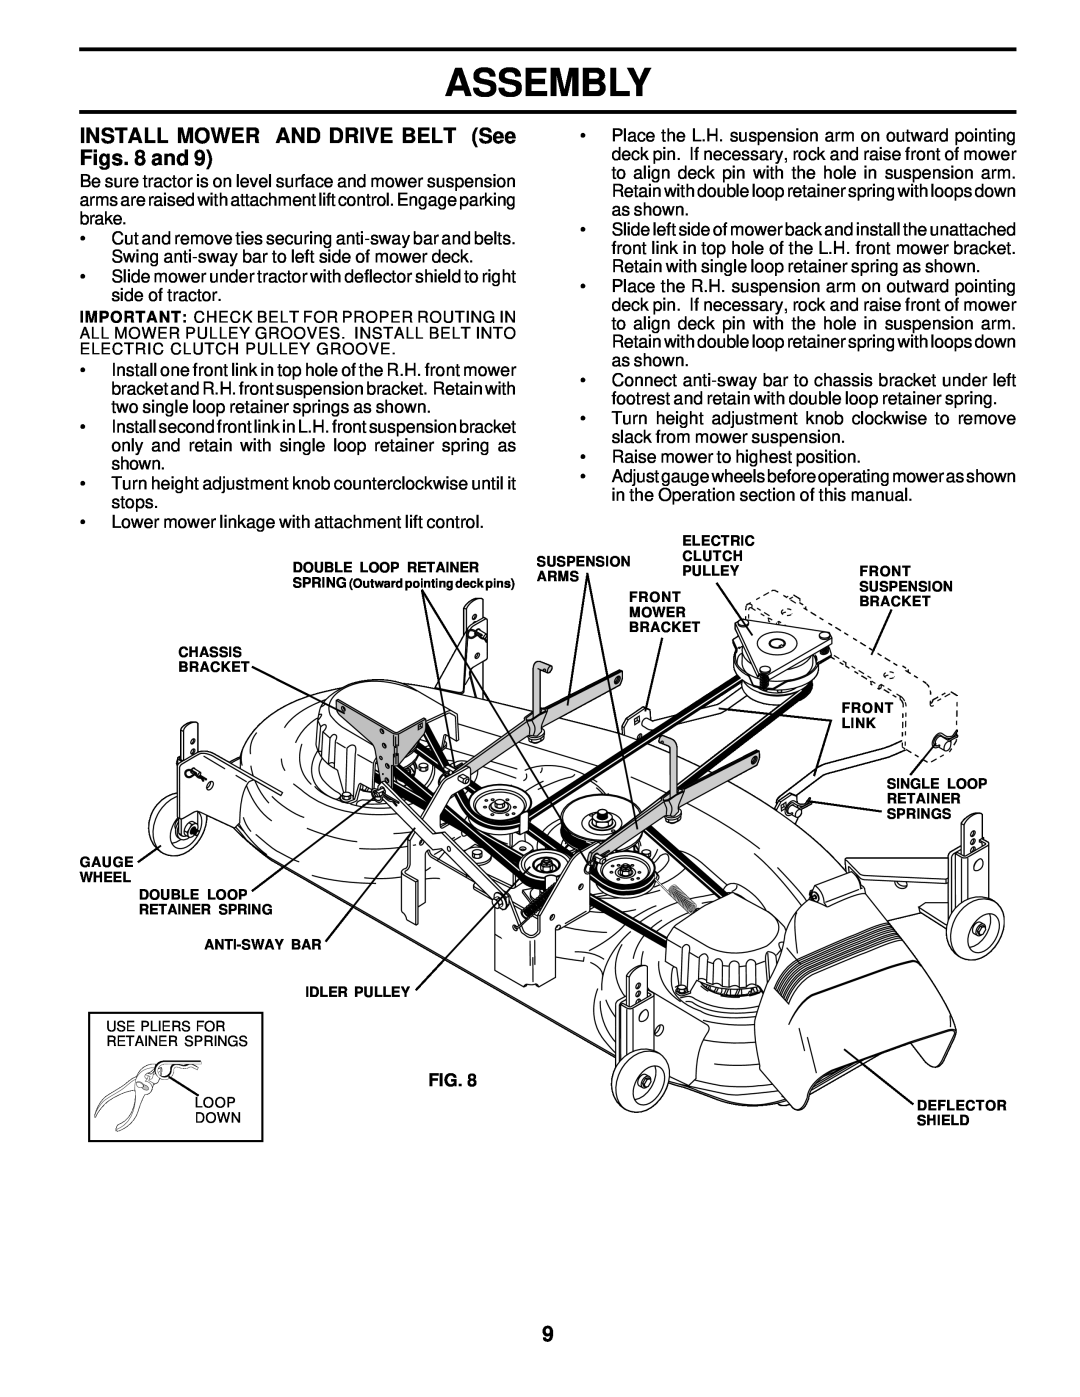 Poulan DPR22H46STB owner manual INSTALL MOWER AND DRIVE BELT See Figs. 8 and, Assembly 